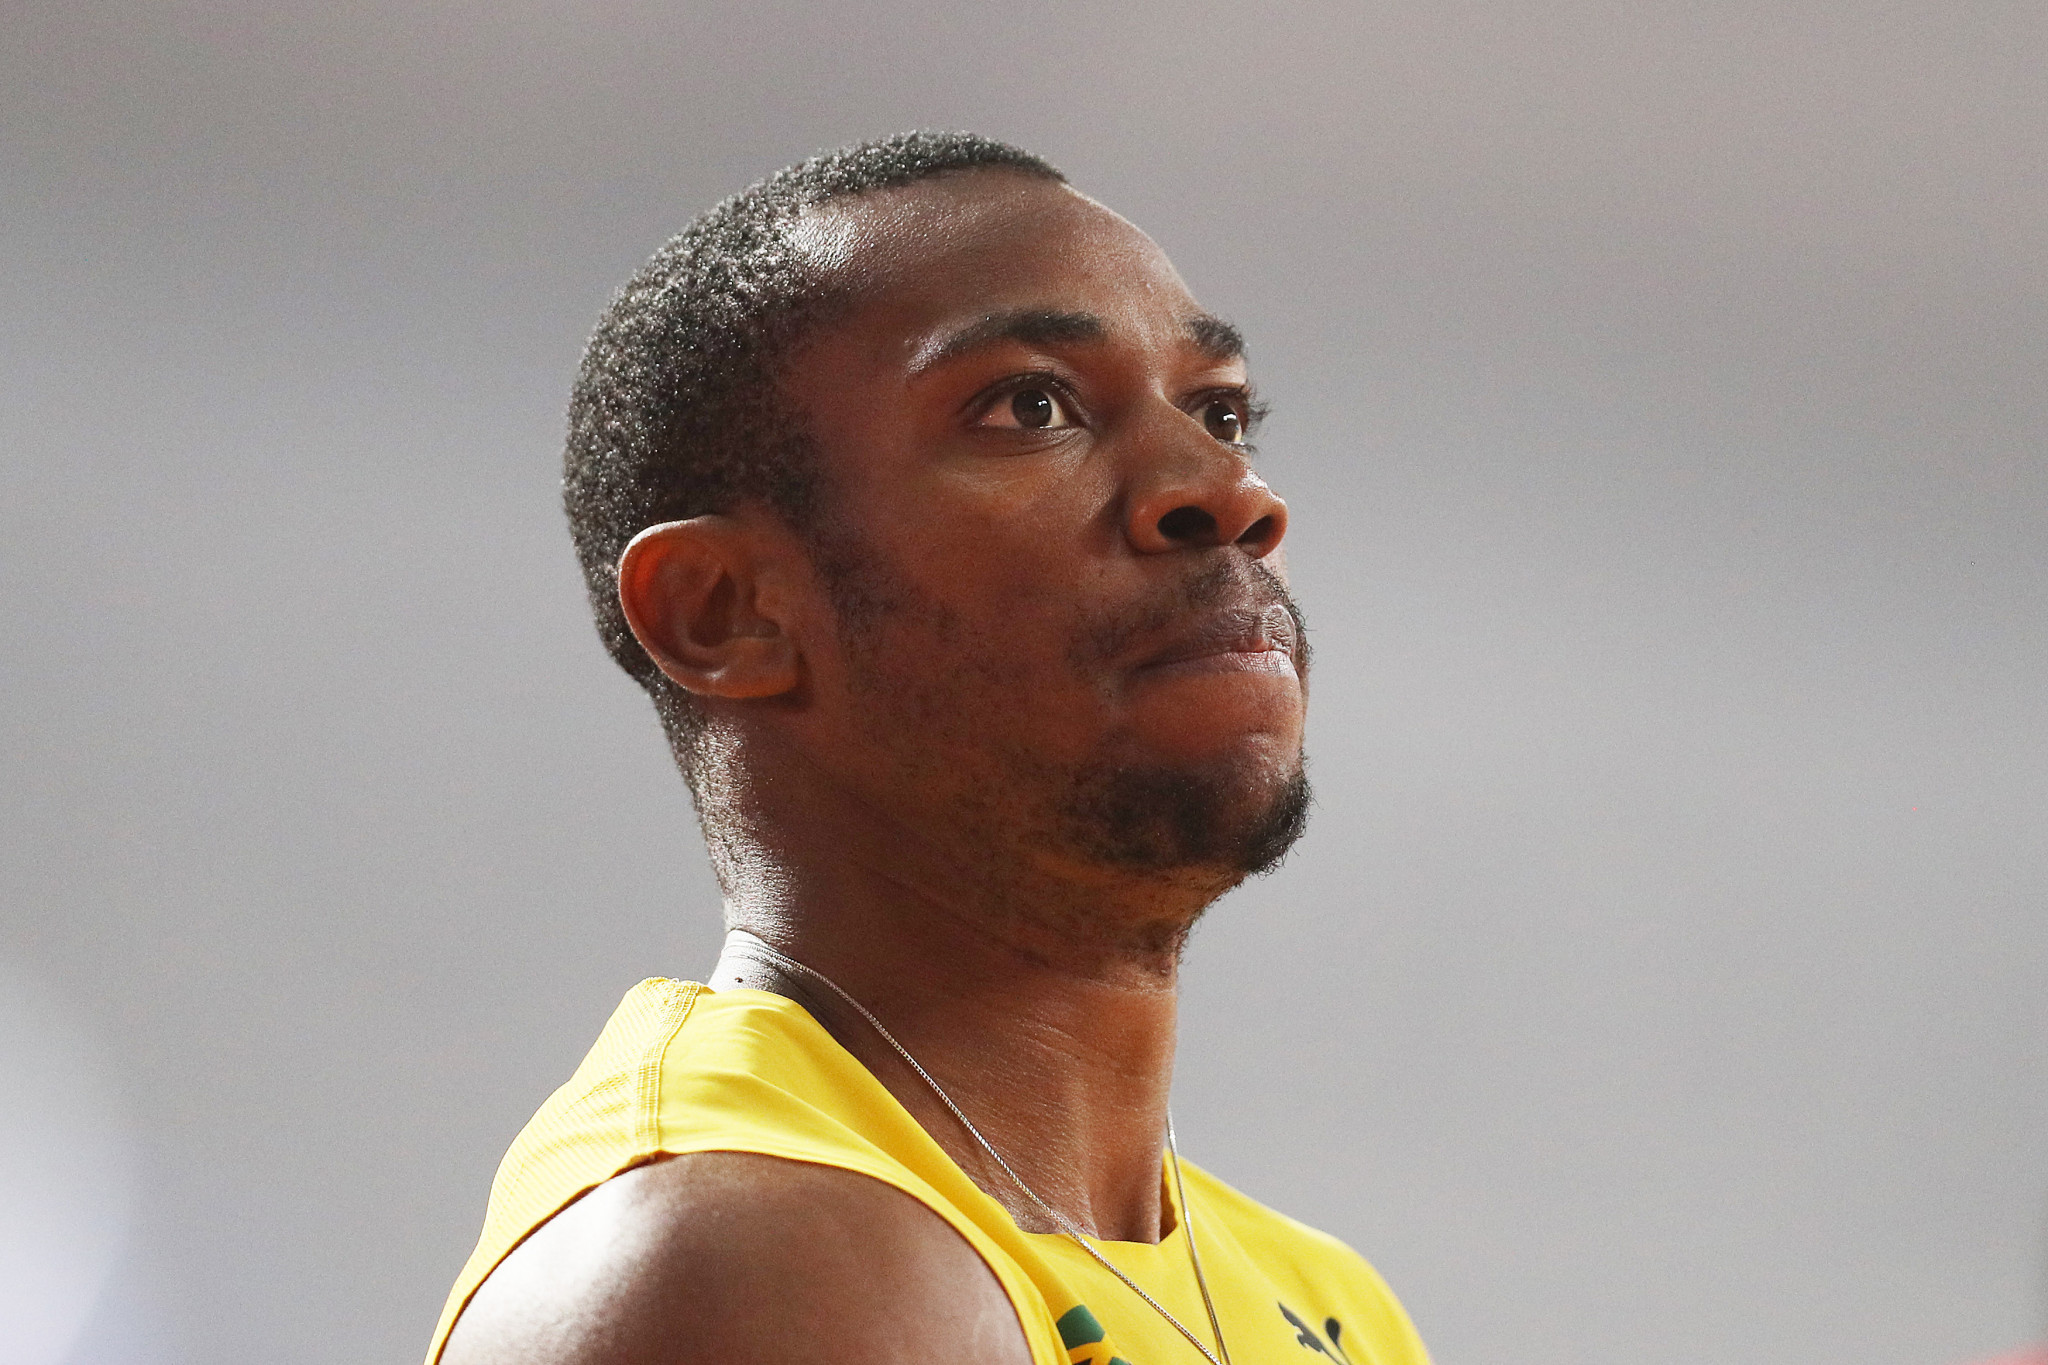 Yohan Blake has said he would rather miss Tokyo 2020 receive the COVID-19 vaccine ©Getty Images